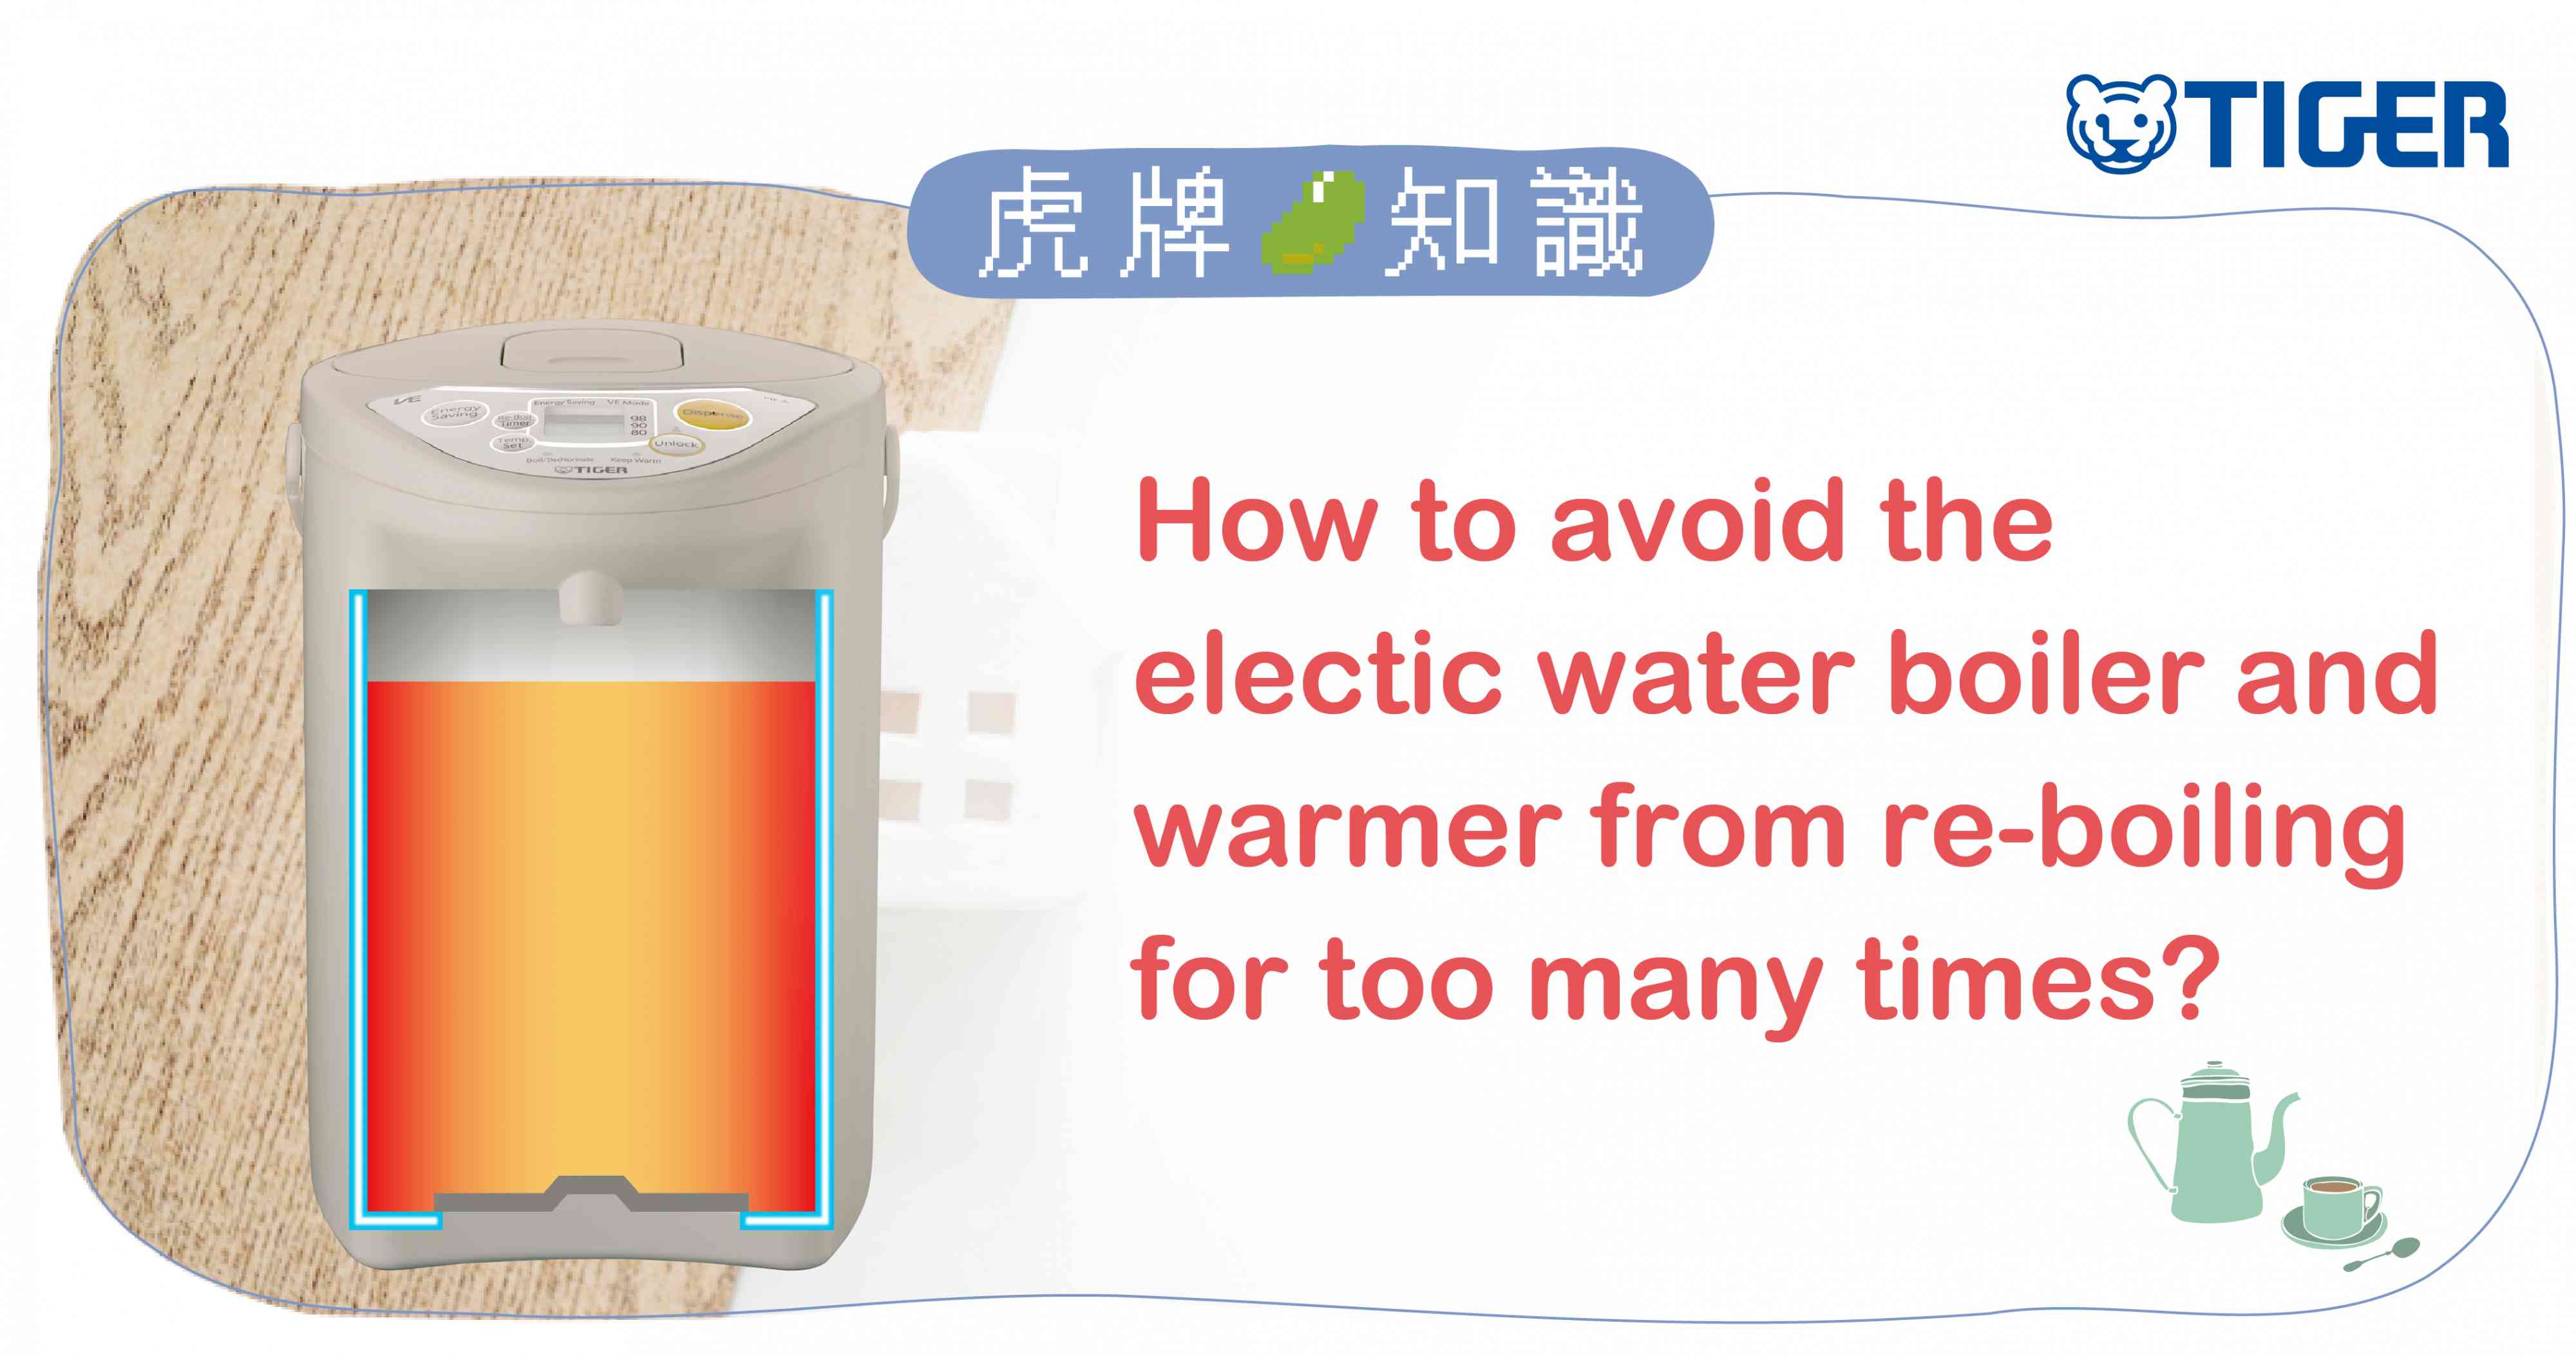 https://www.tiger-corporation.hk/elFinder/files/trivia/tiger-trivia-the-electic-water-boiler-and-warmer-from-re-boiling-for-too-many-times-en-2.jpg